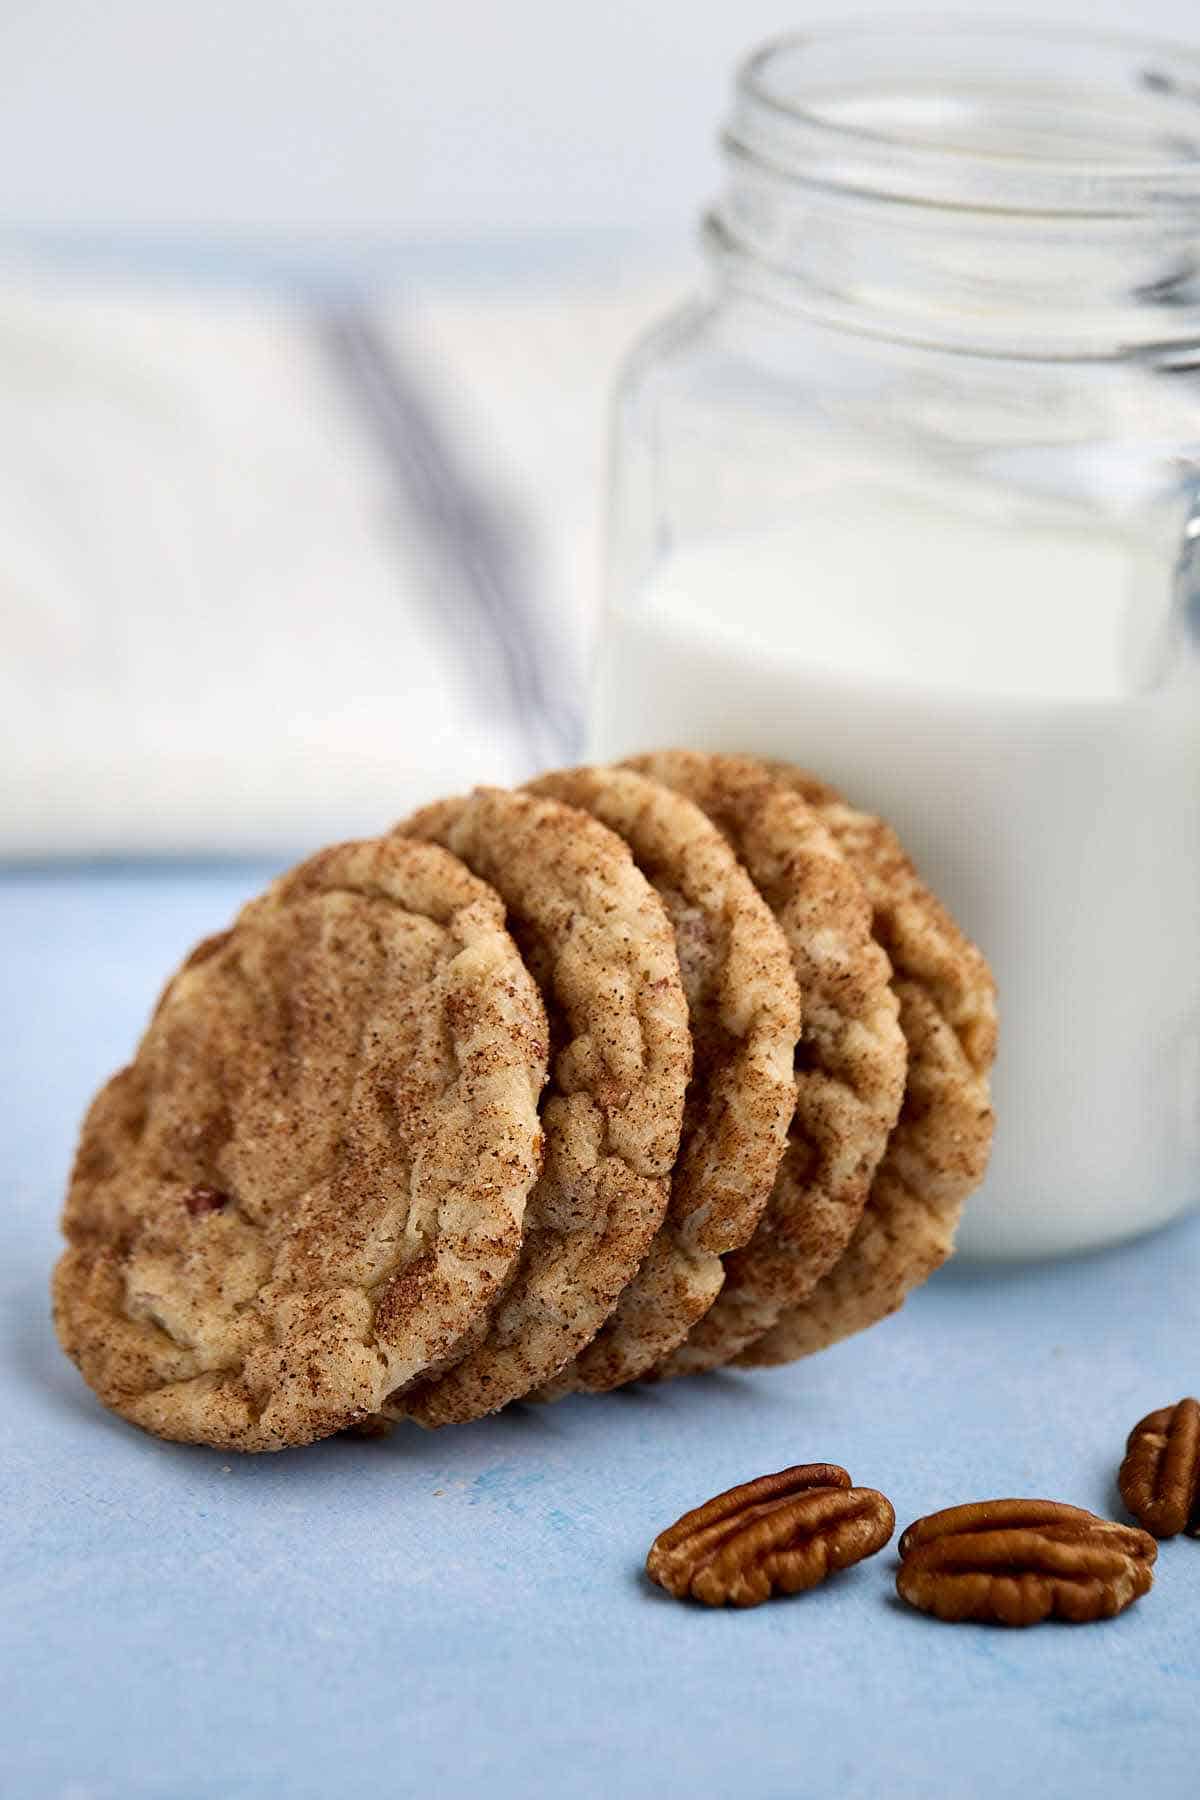 Butter pecan cake mix cookies leaning against a glass of milk.